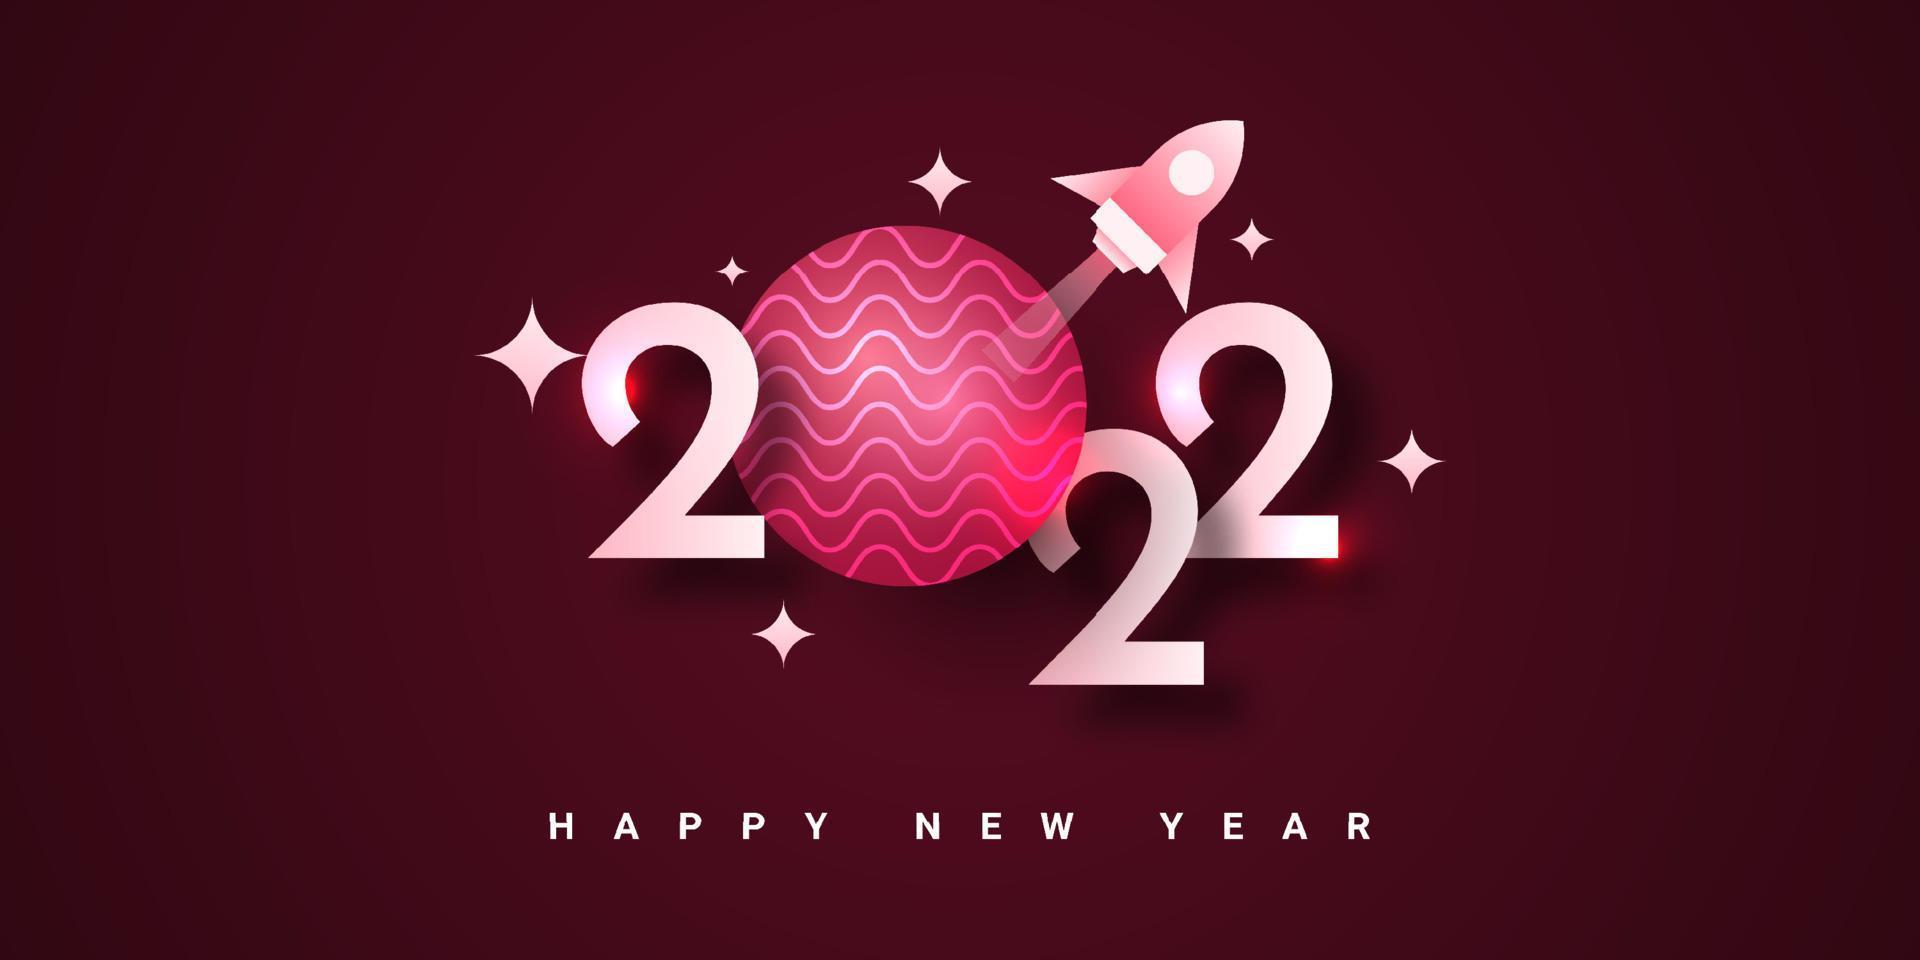 2022 Happy new year illustration template design vector